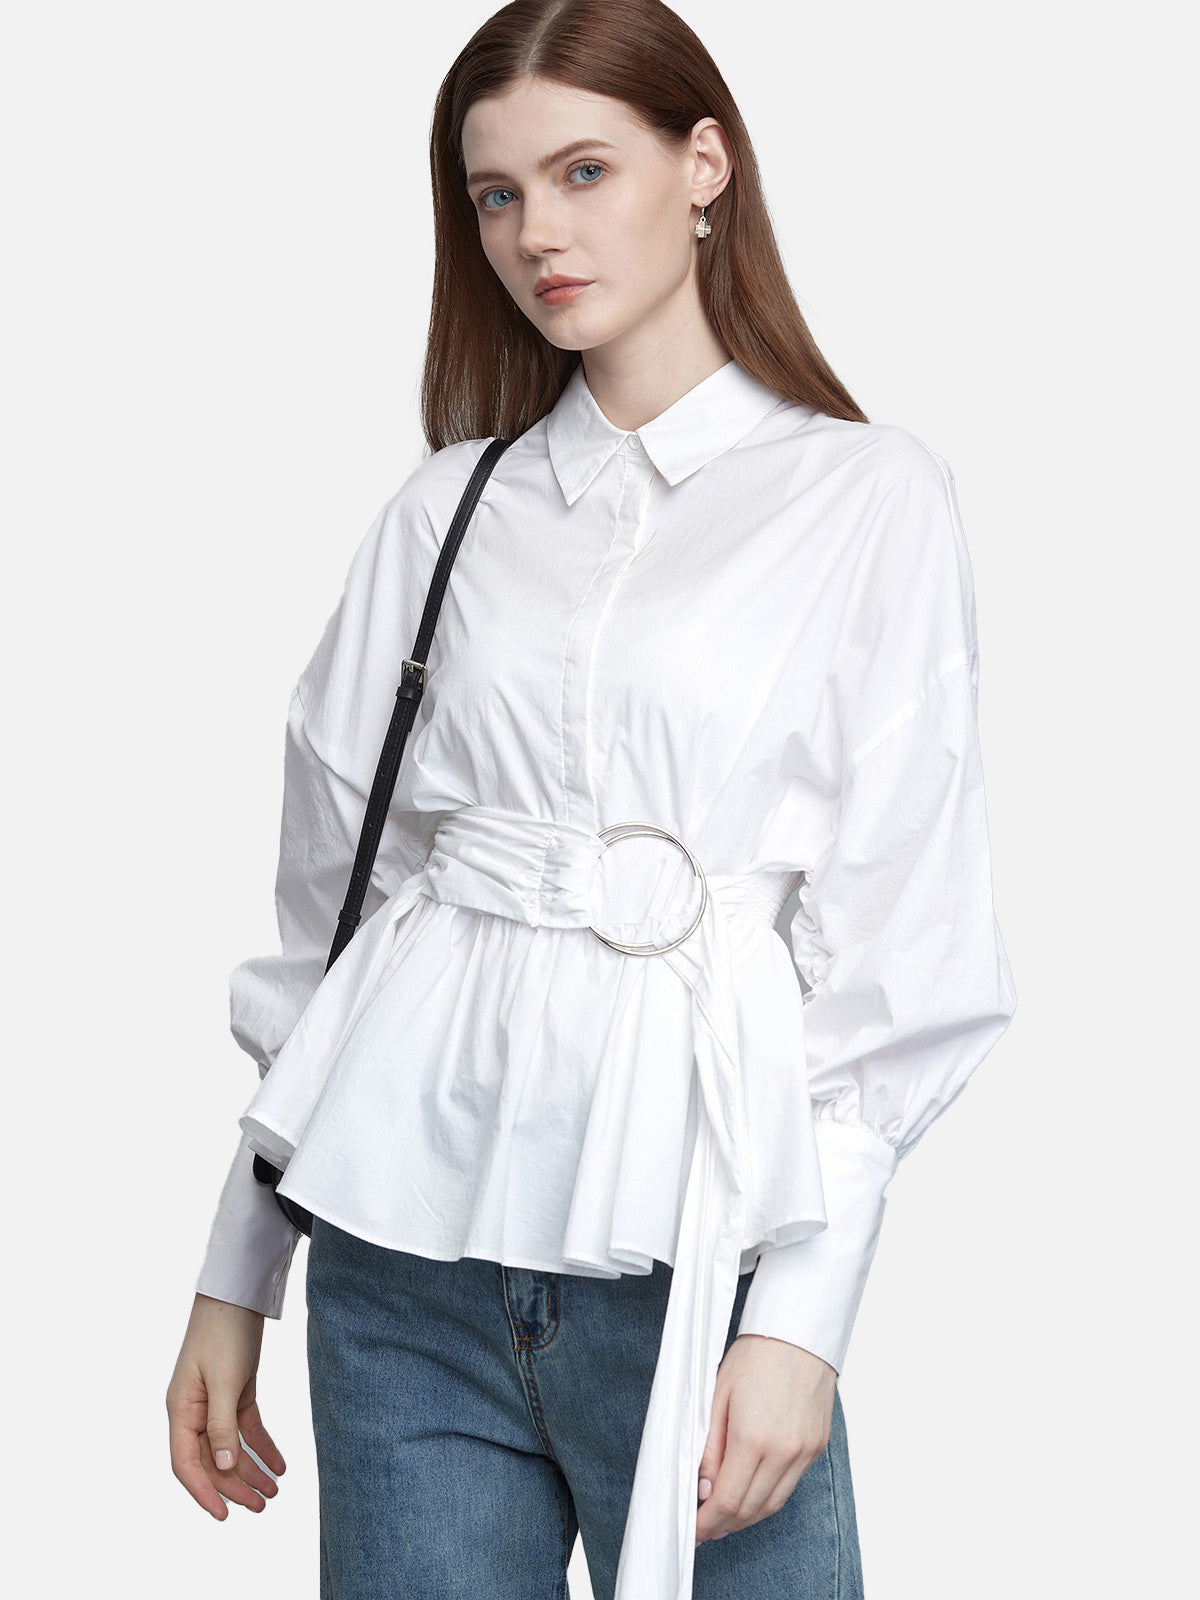 Irregular White Shirt With Casual Lapel And Waist